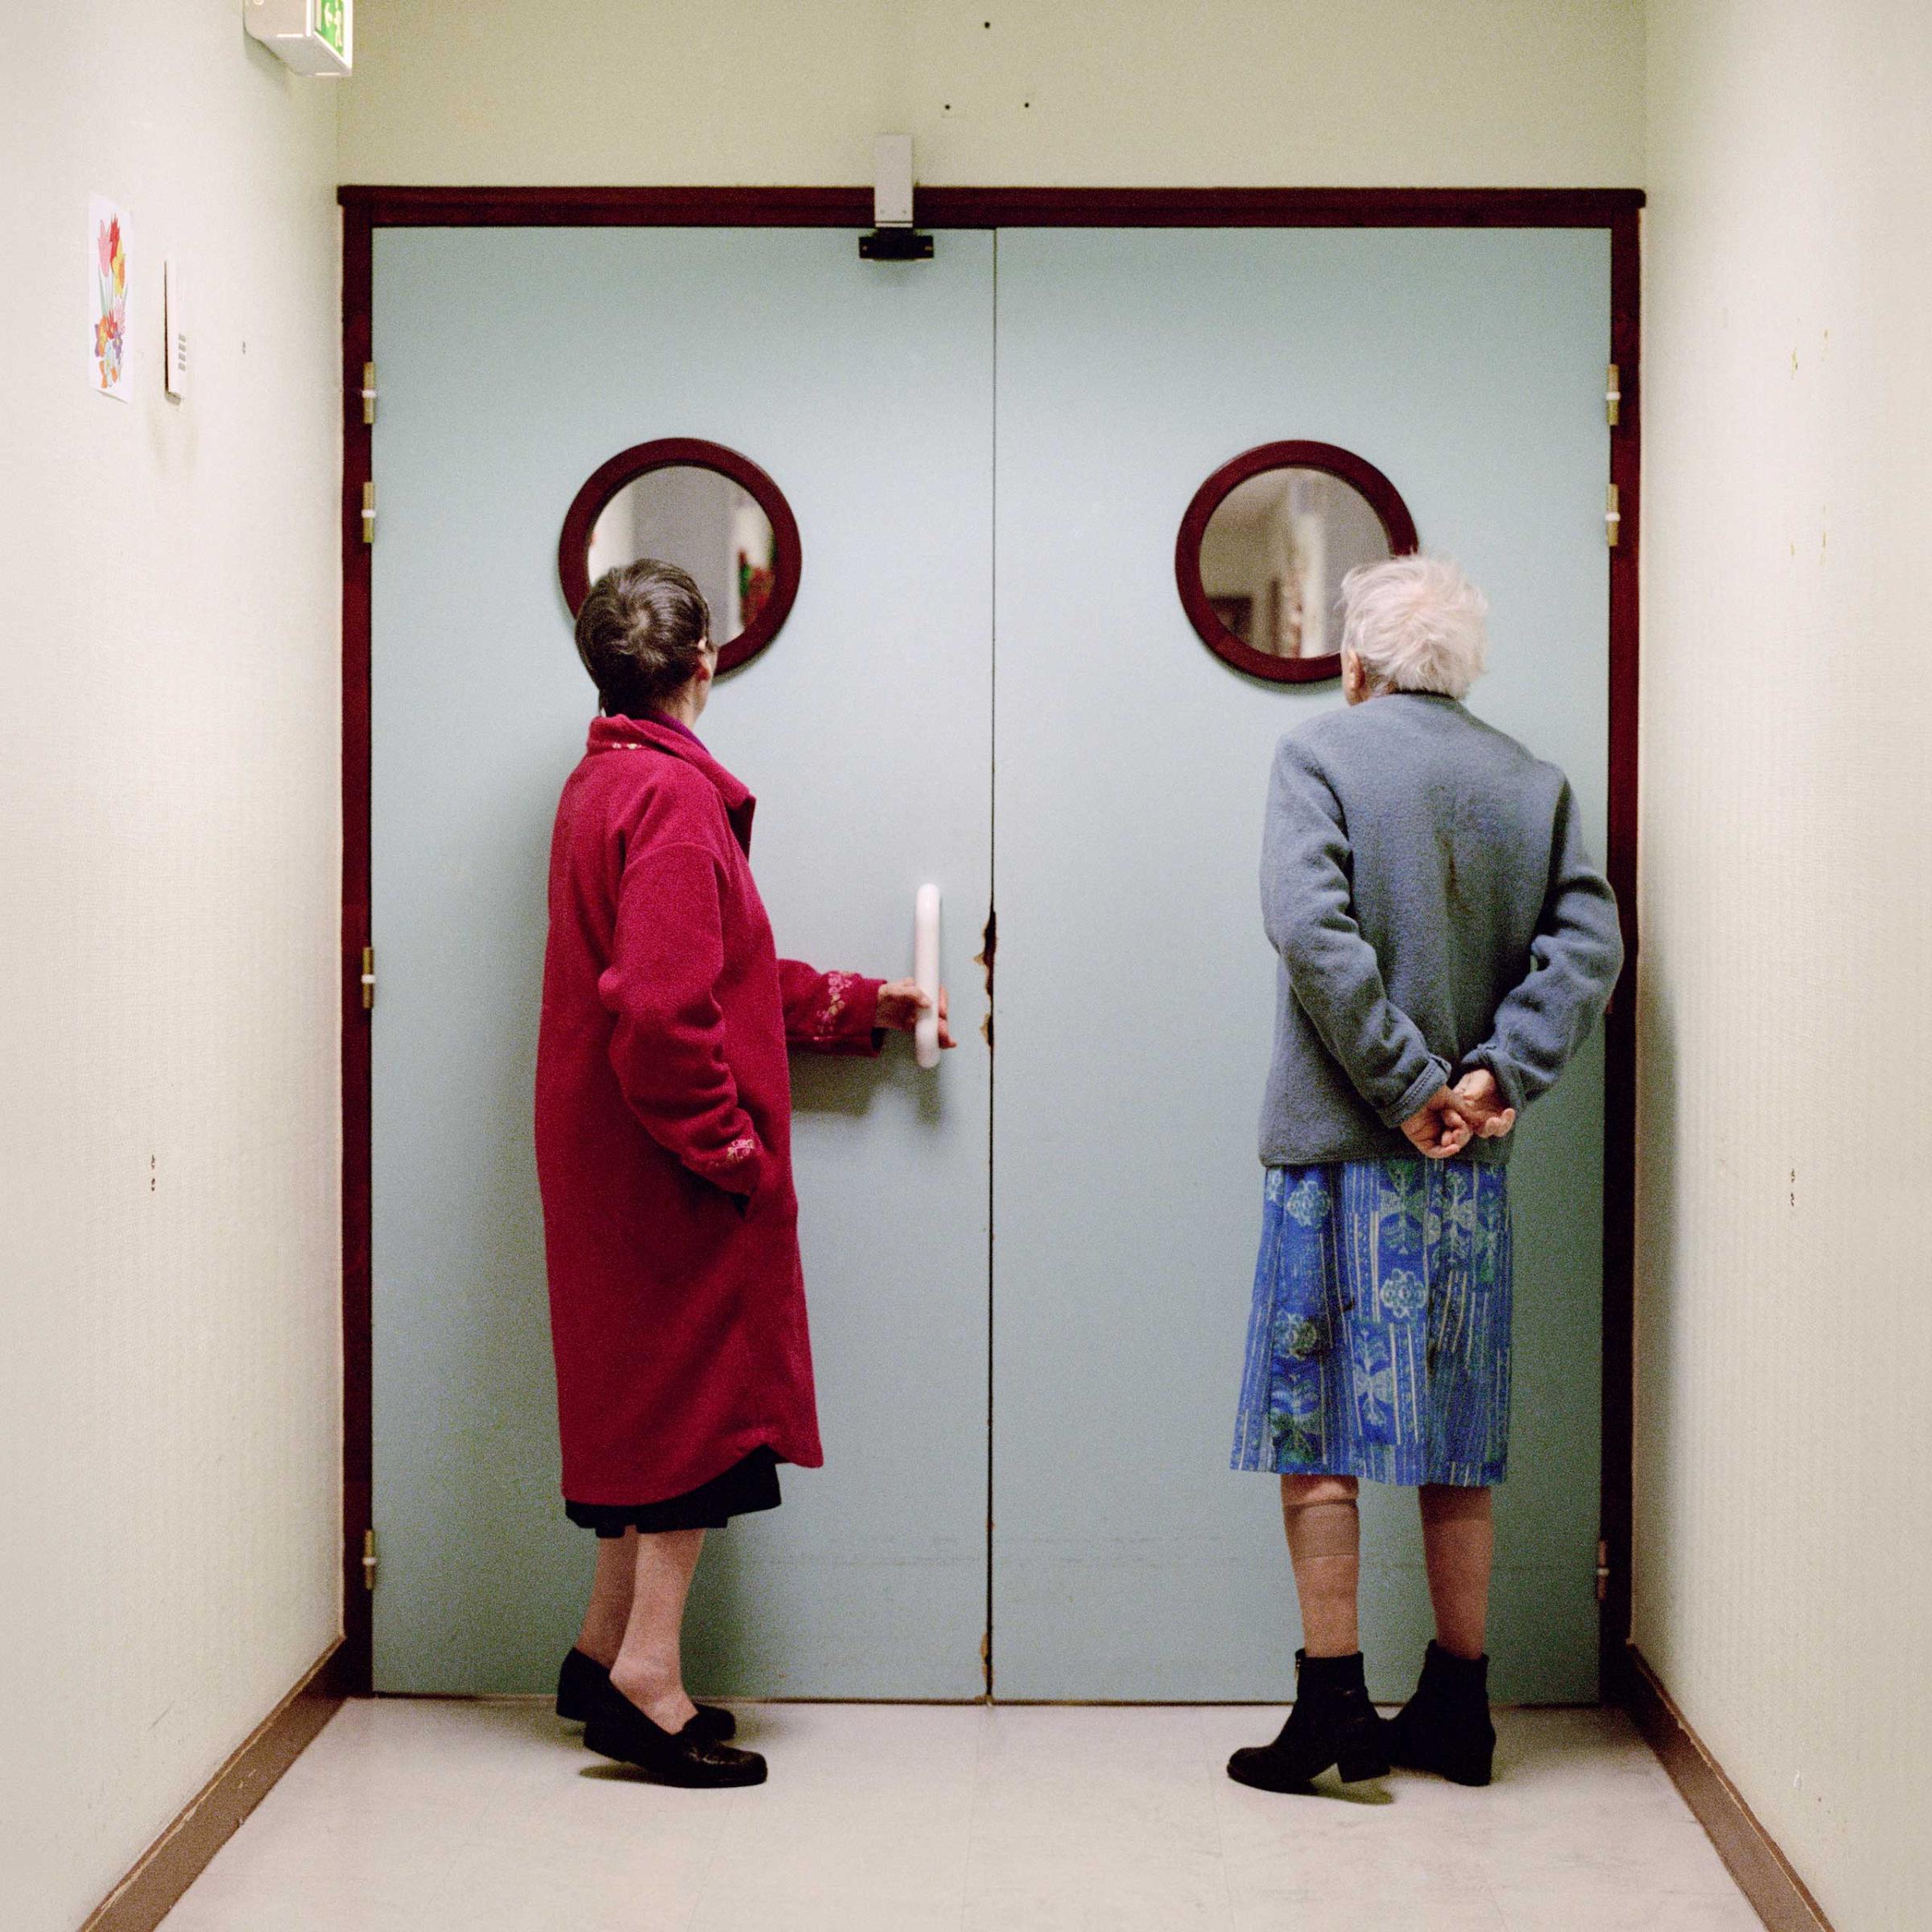 Two residents stand in front of the ward’s locked exit door